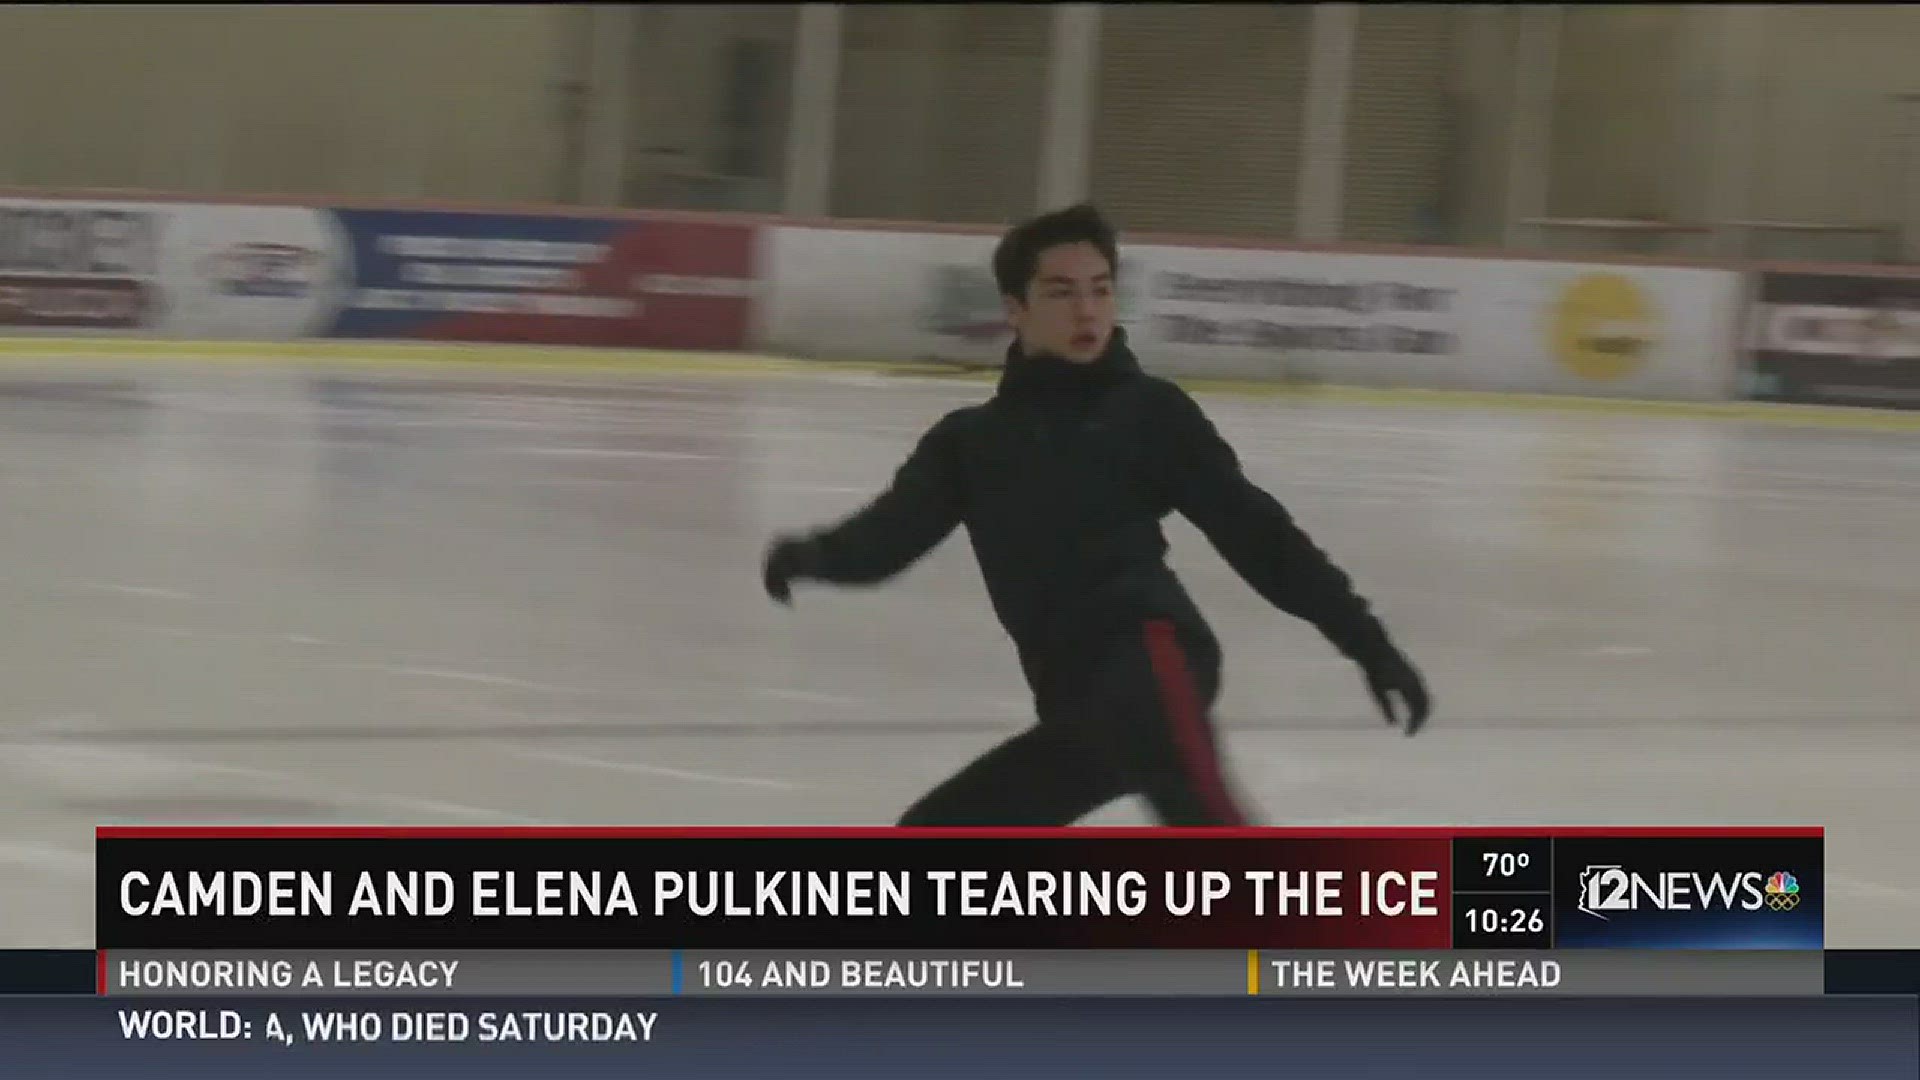 Camden and Elena Pulkinen tearing up the ice